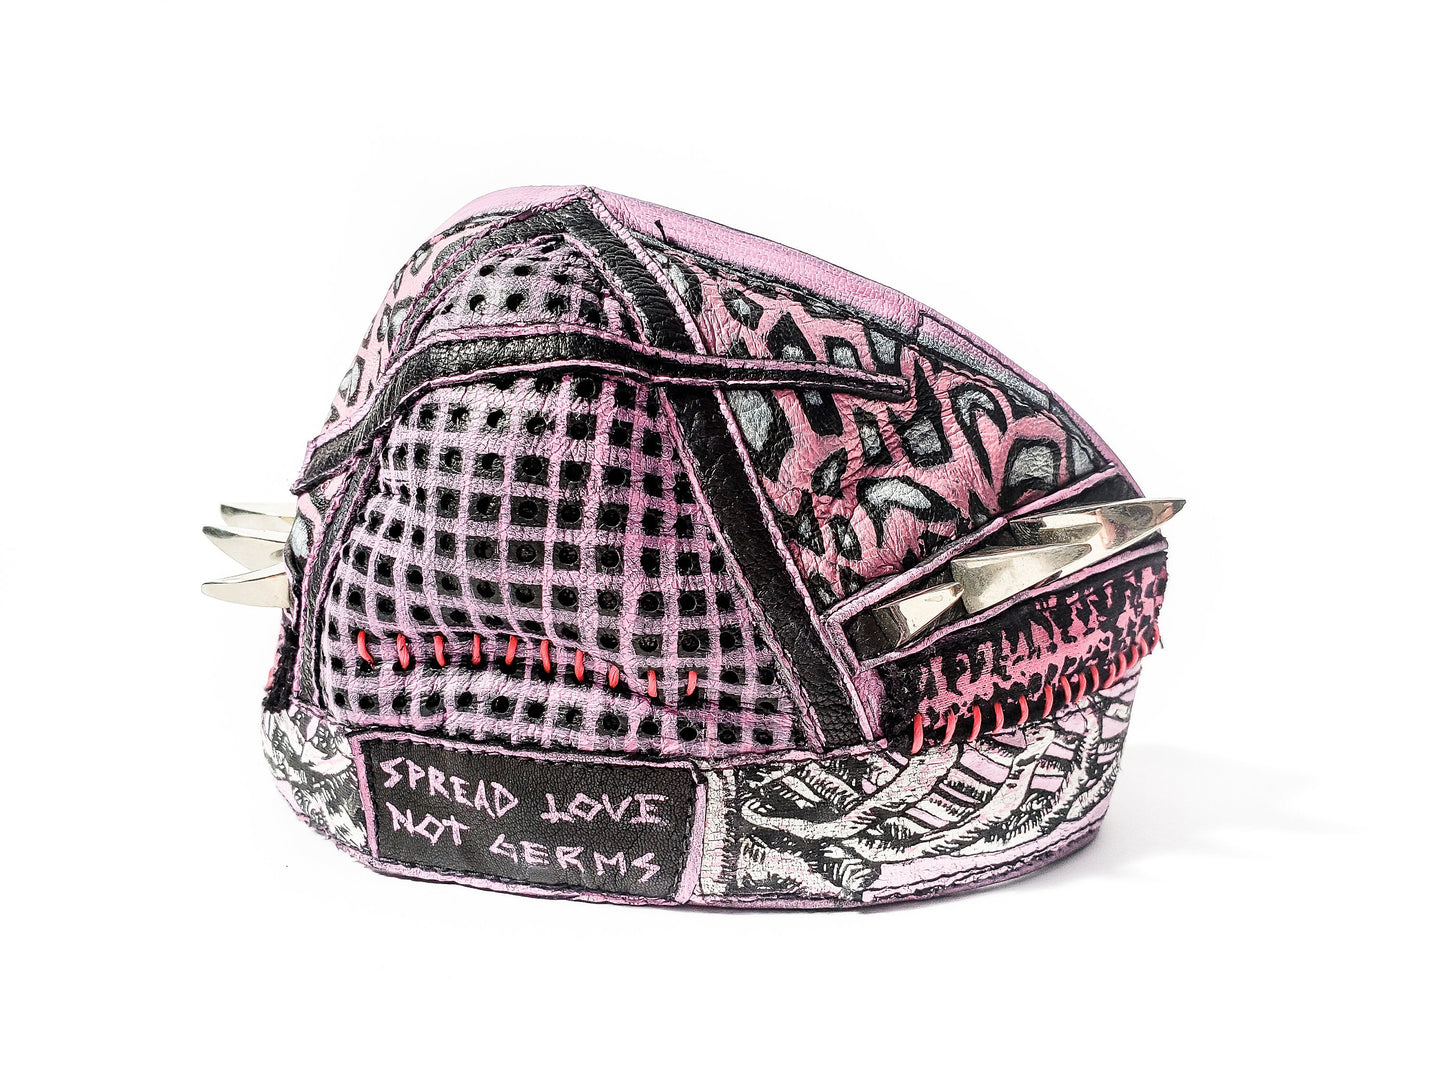 Spread Love Not Germs Pink Cyberpunk Protective Mask